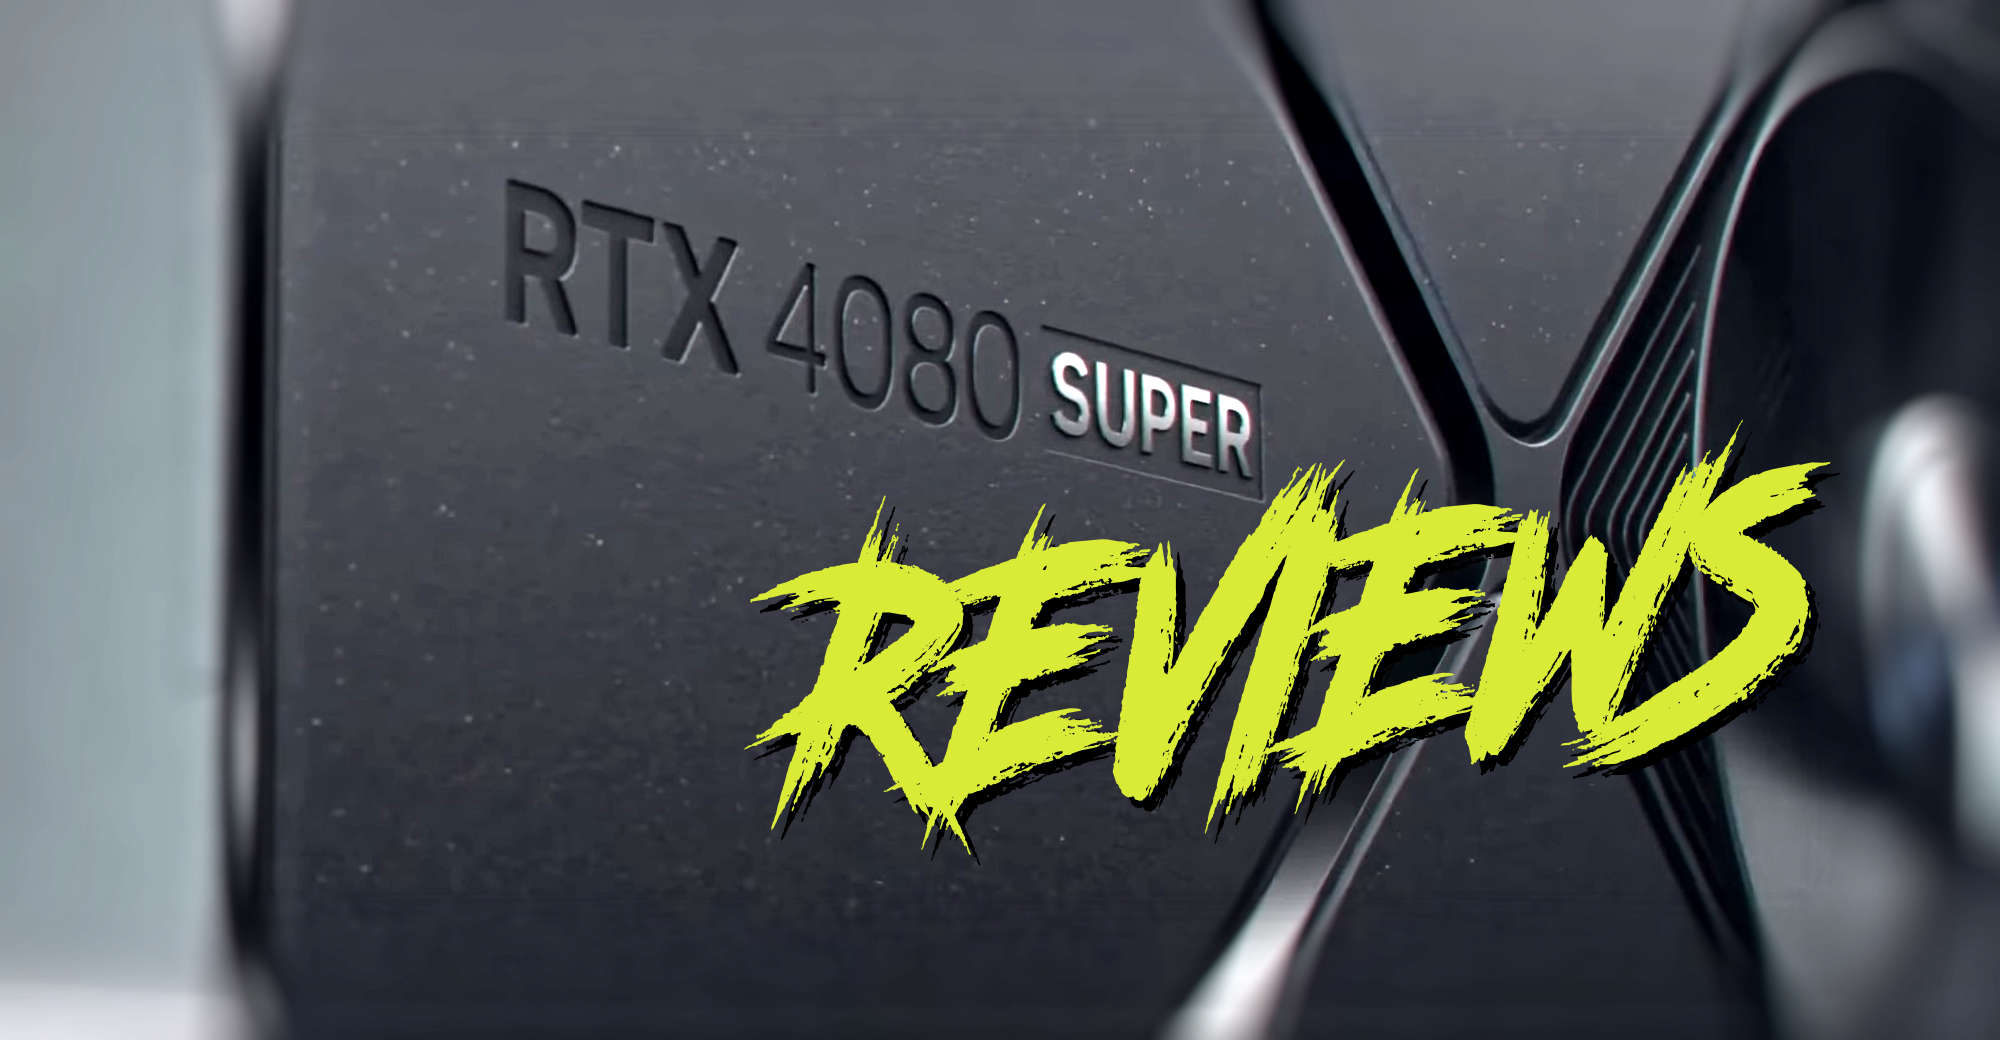 Nvidia RTX 4080 Super review: $999 is the main feature - The Verge